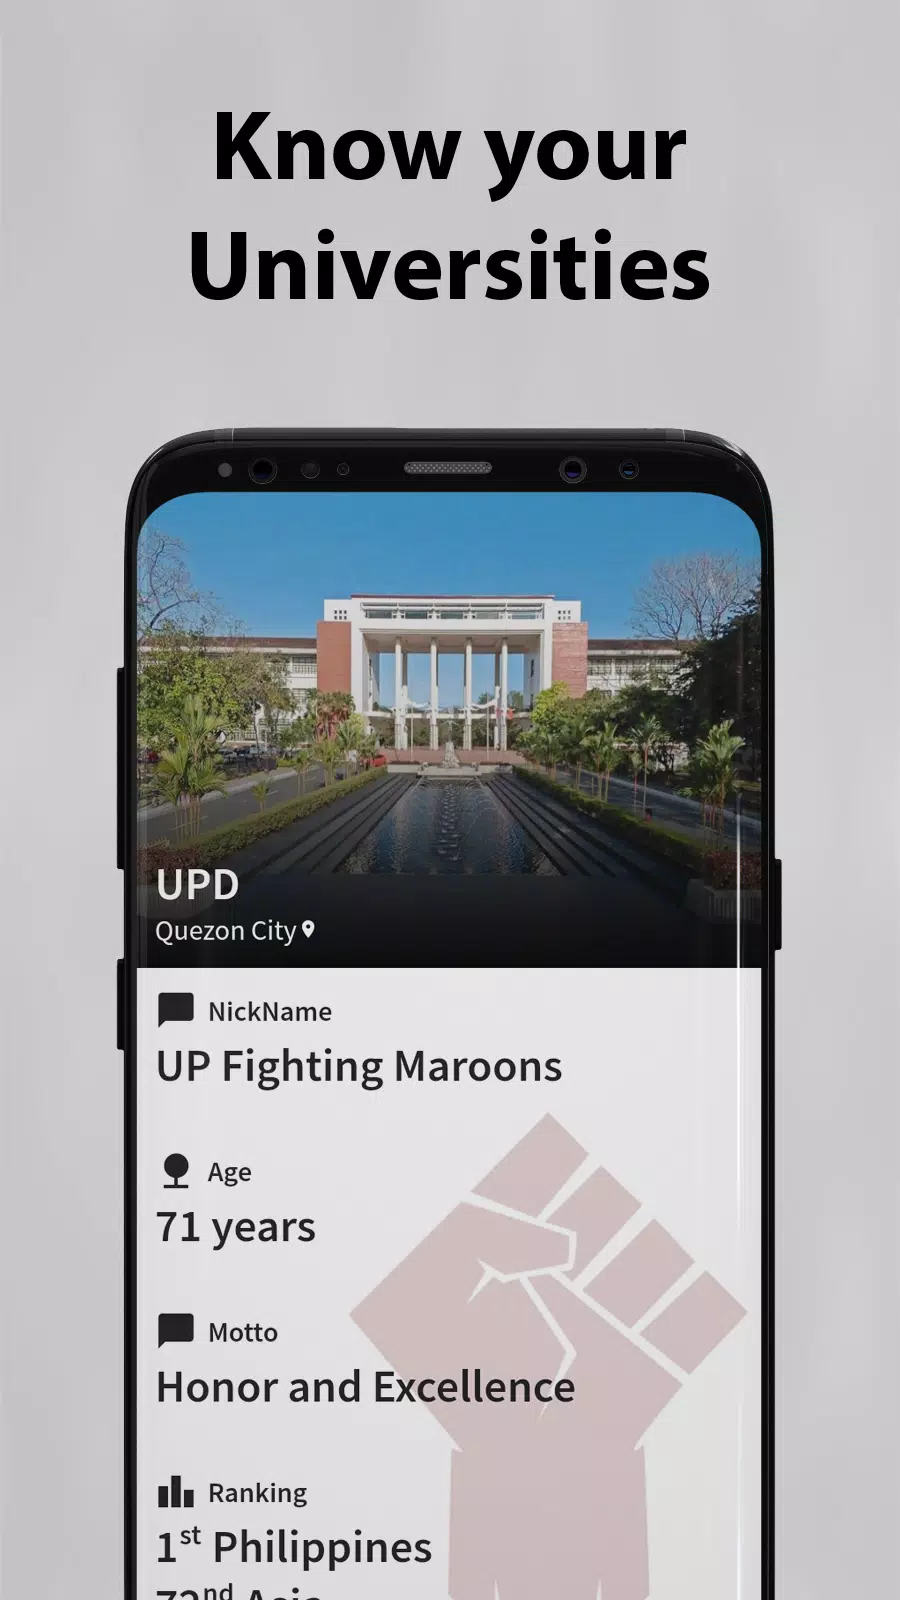 UPG Calculator APK for Android Download